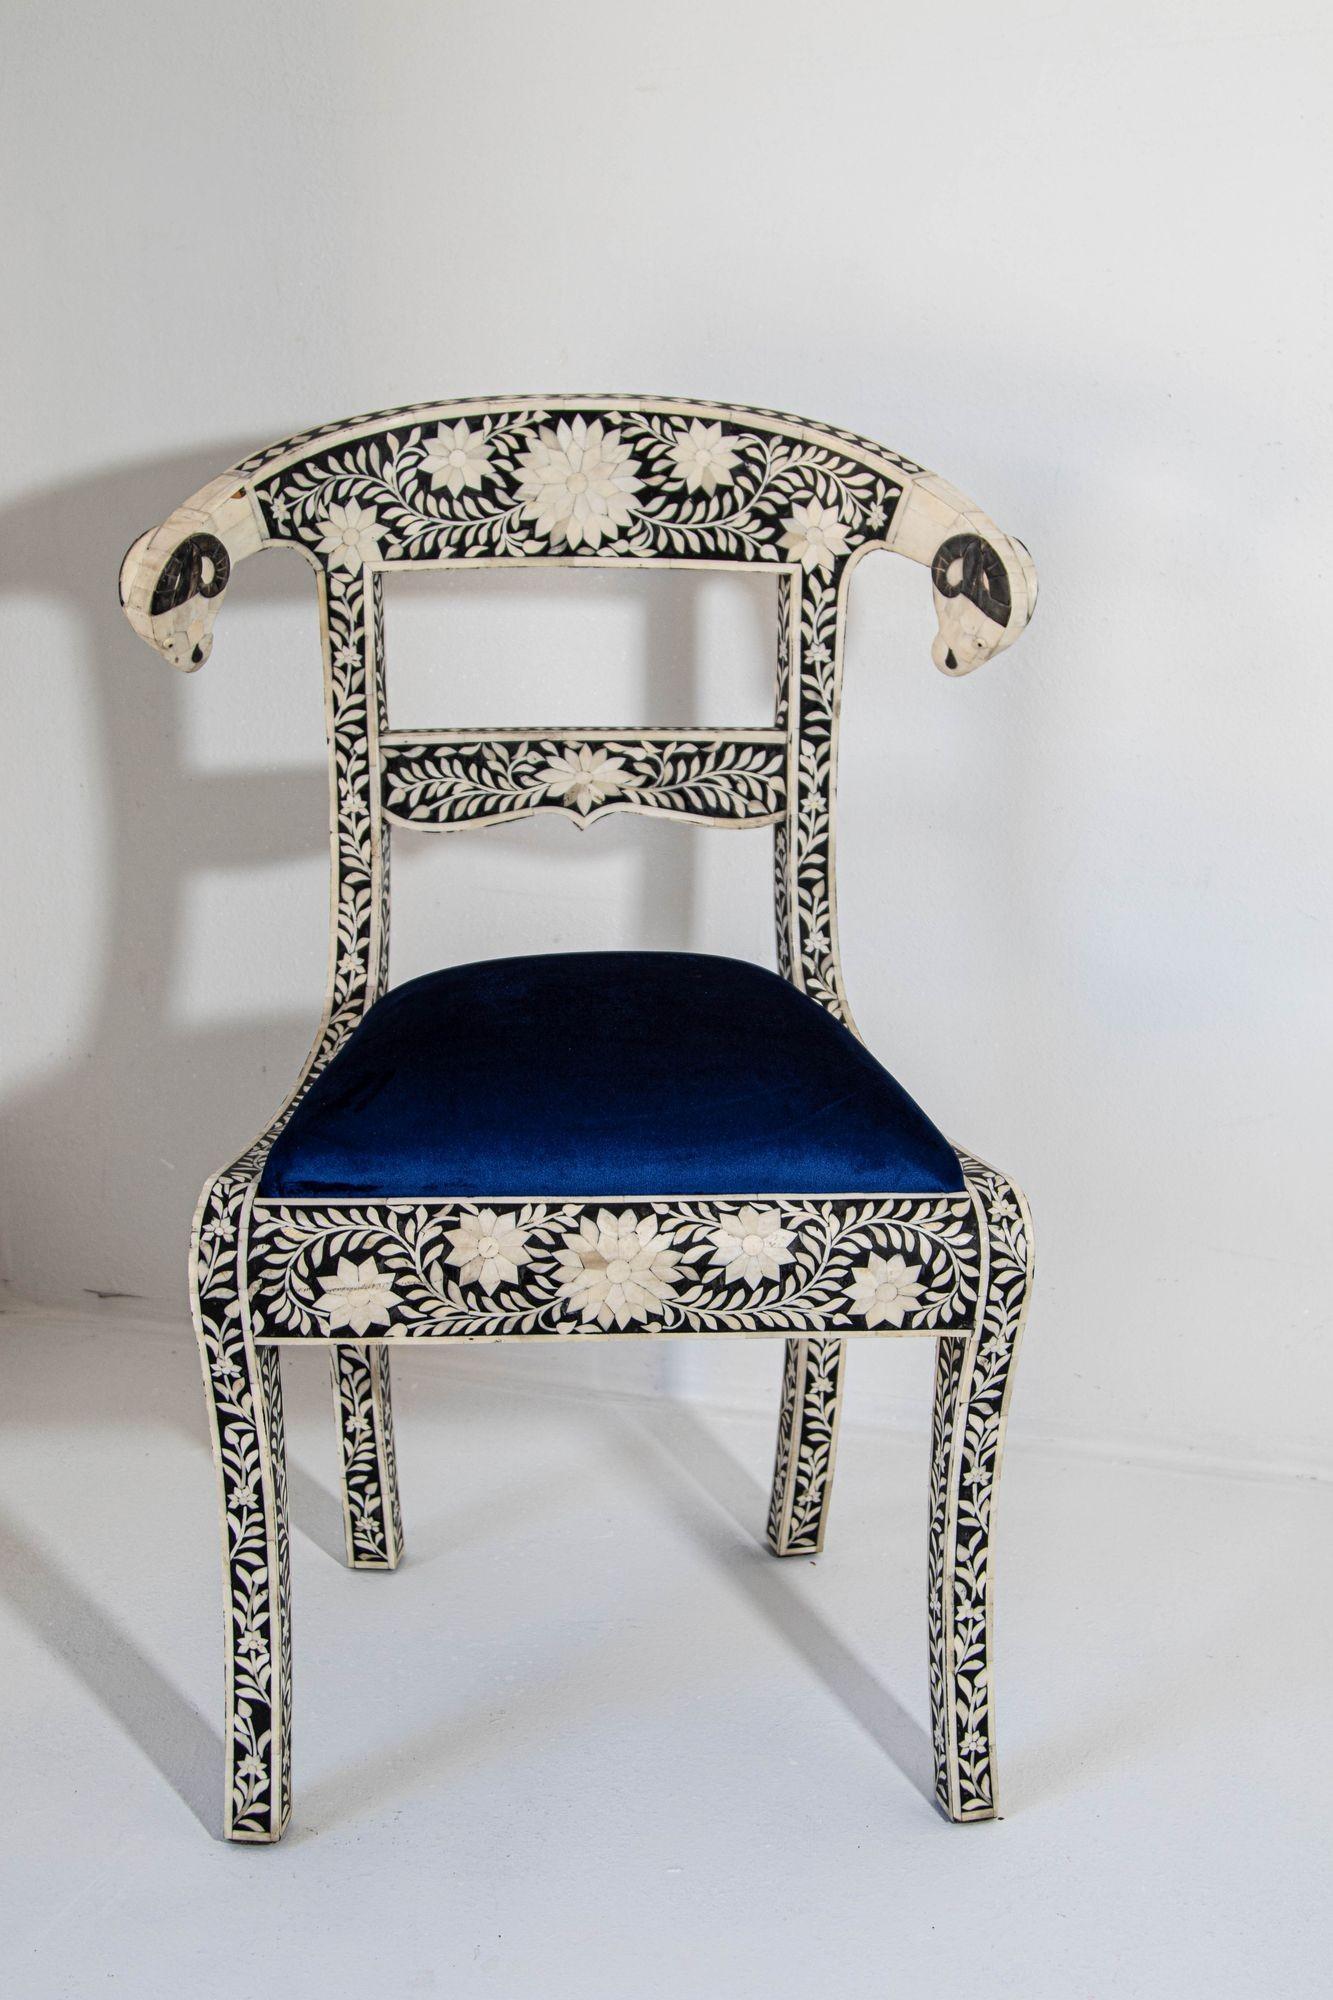 Antique Anglo-Indian Side Chairs with Ram's Head Bone Inlay Royal Blue Seat Pair In Good Condition For Sale In North Hollywood, CA